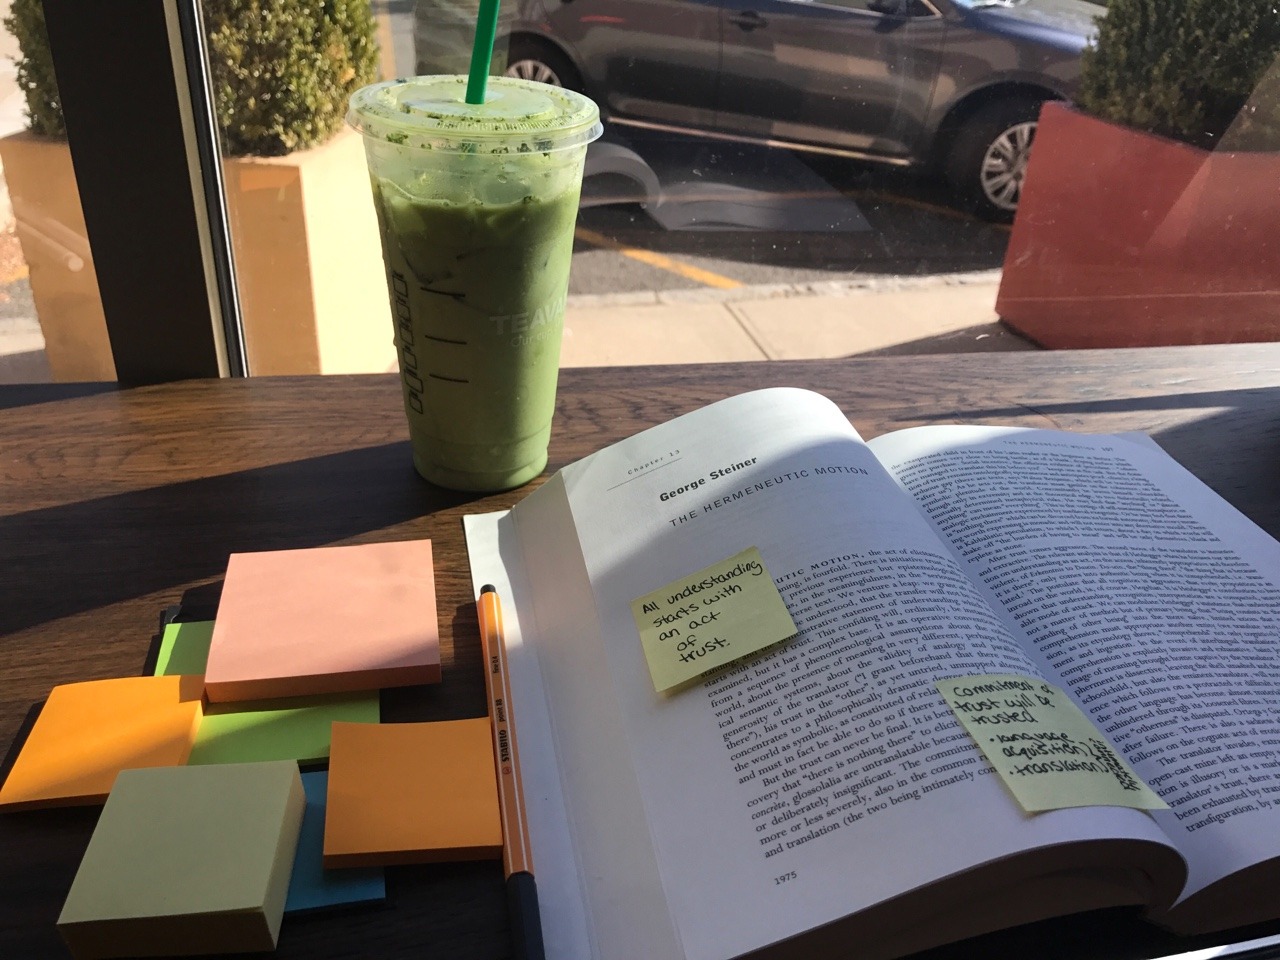 A translation theory textbook is open in front of a window. Next to it is an iced matcha latte and a pile of post-it notes.